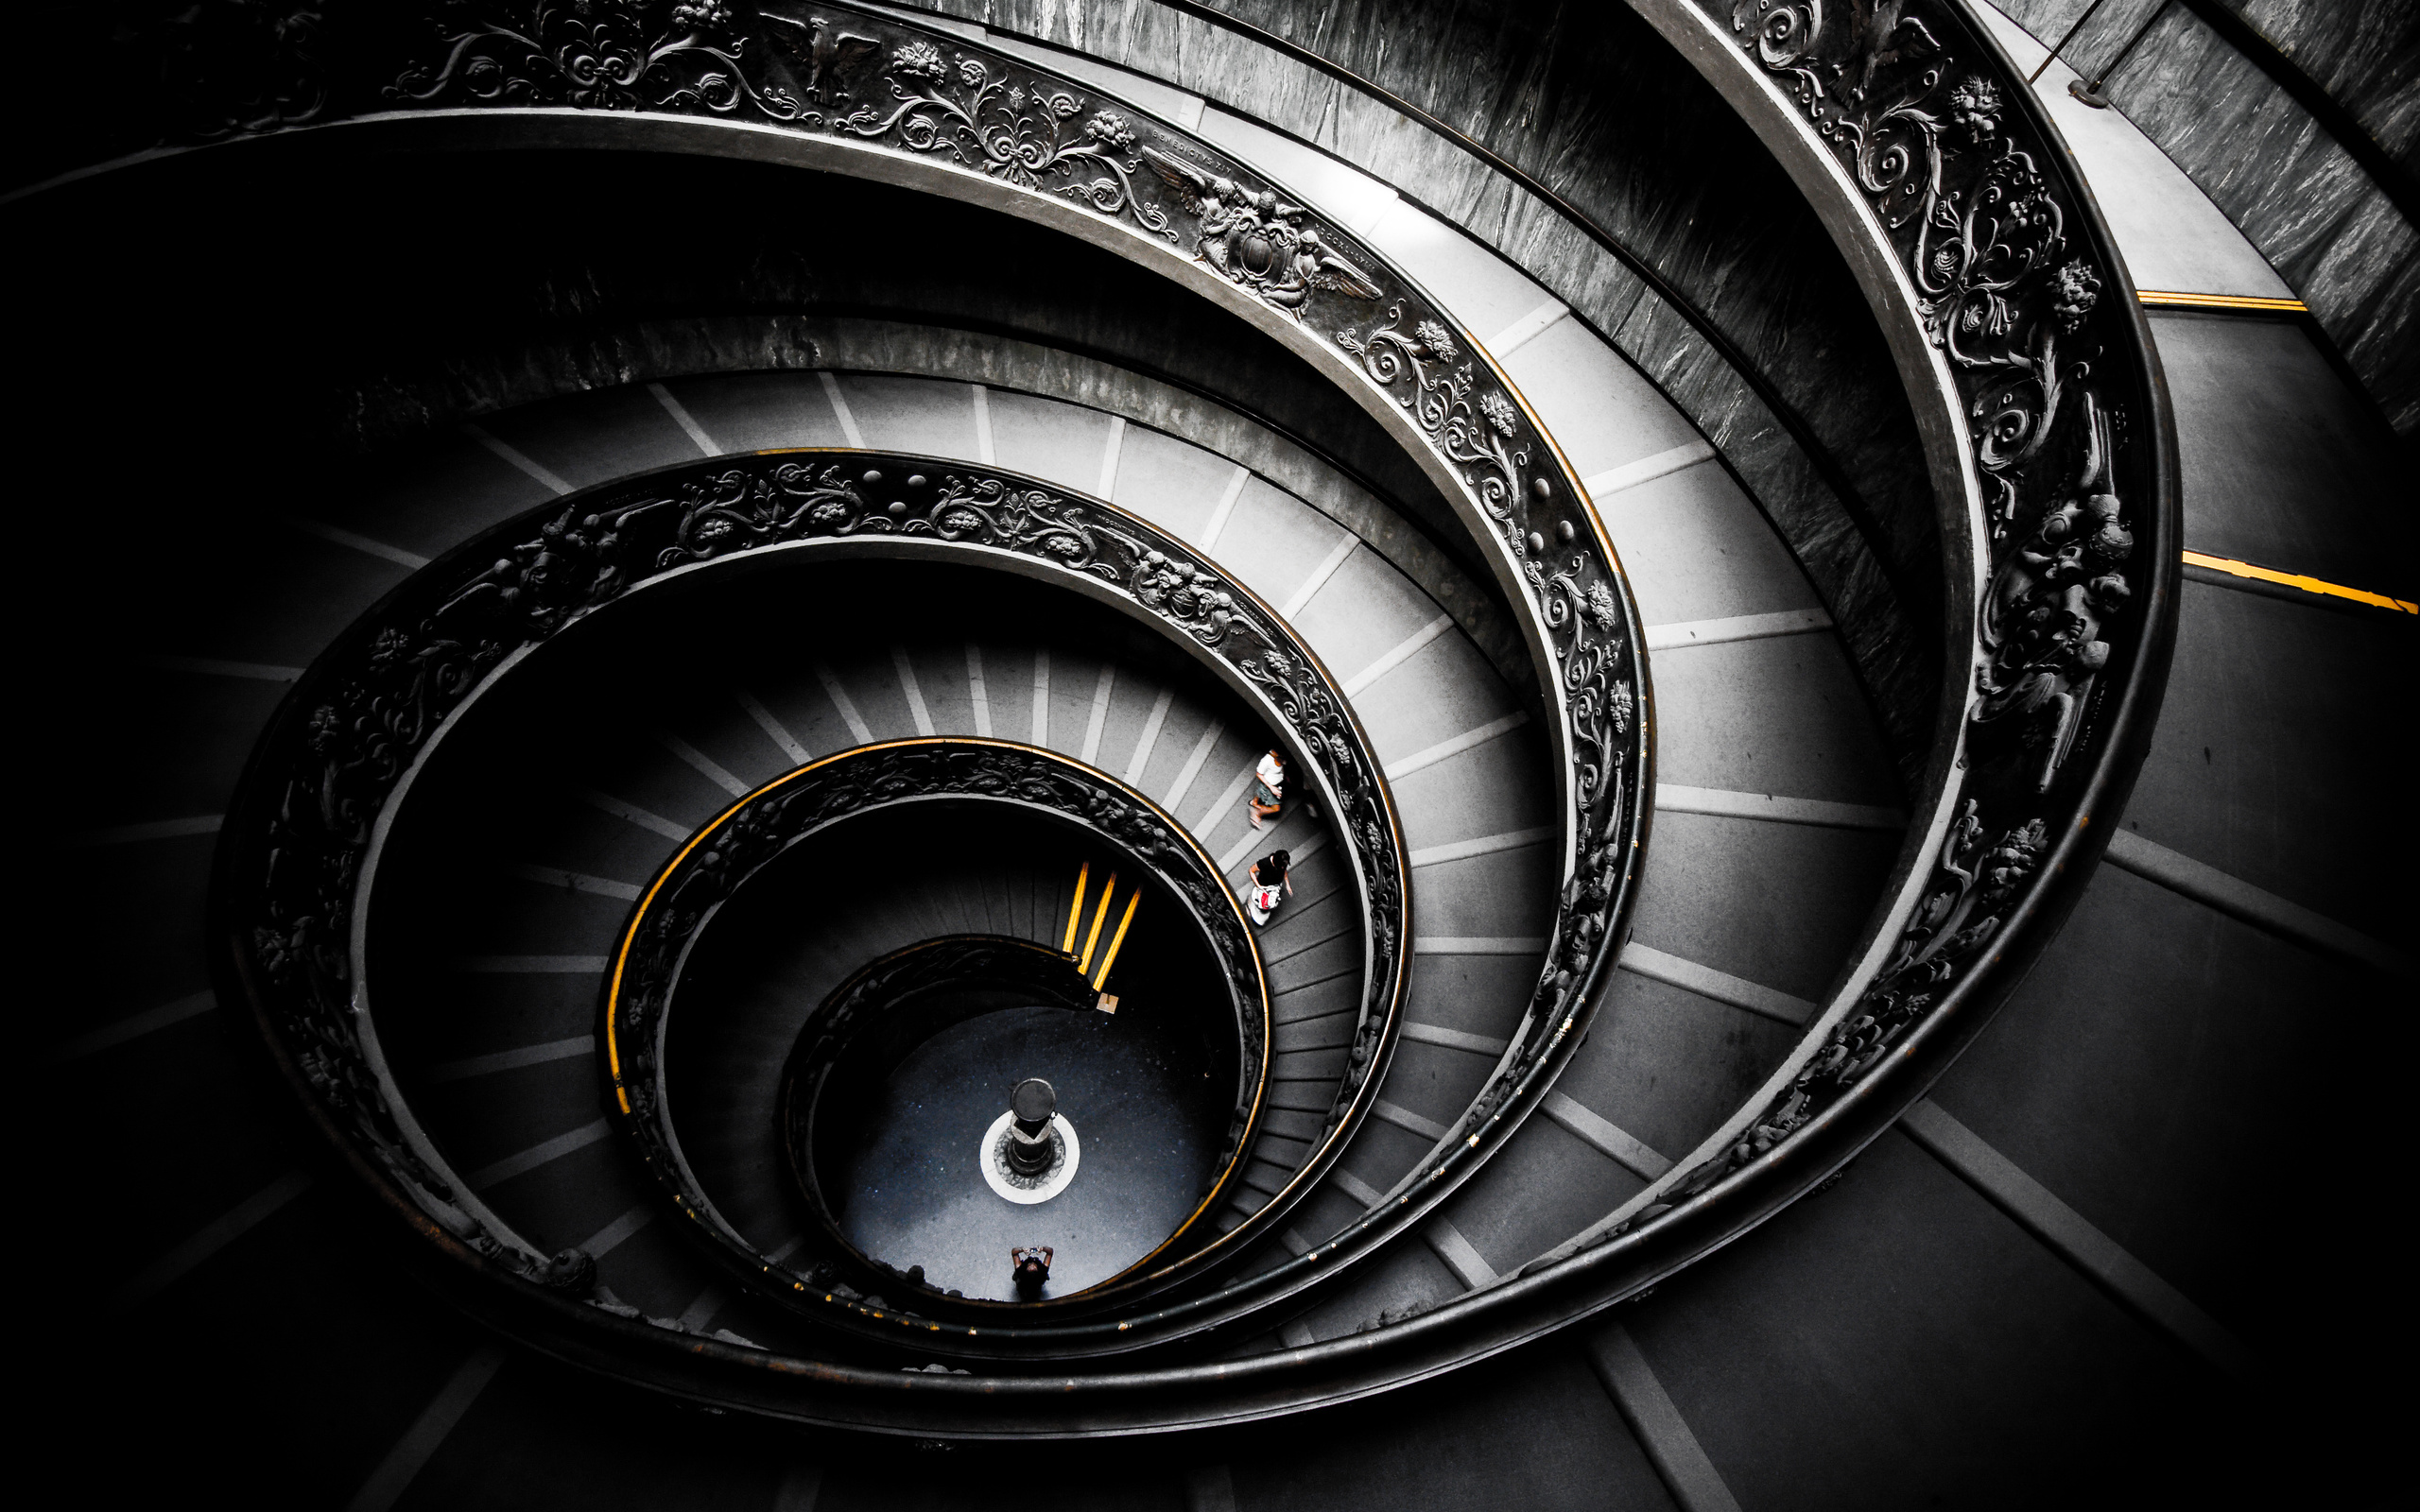 2560x1600 helix, great, staircase, art deco, great, stairway ...